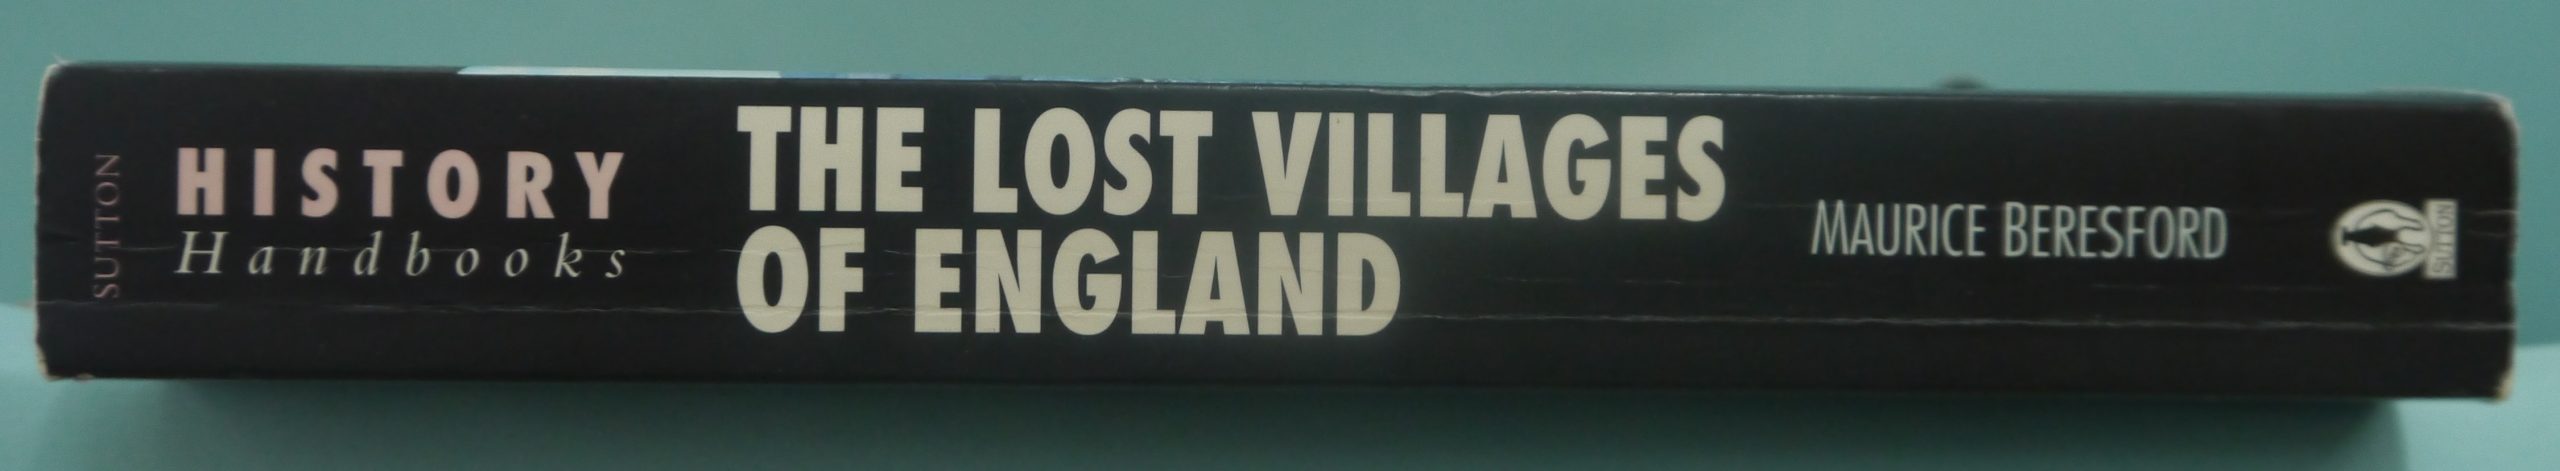 The spine of Beresford's Lost Villages of England book